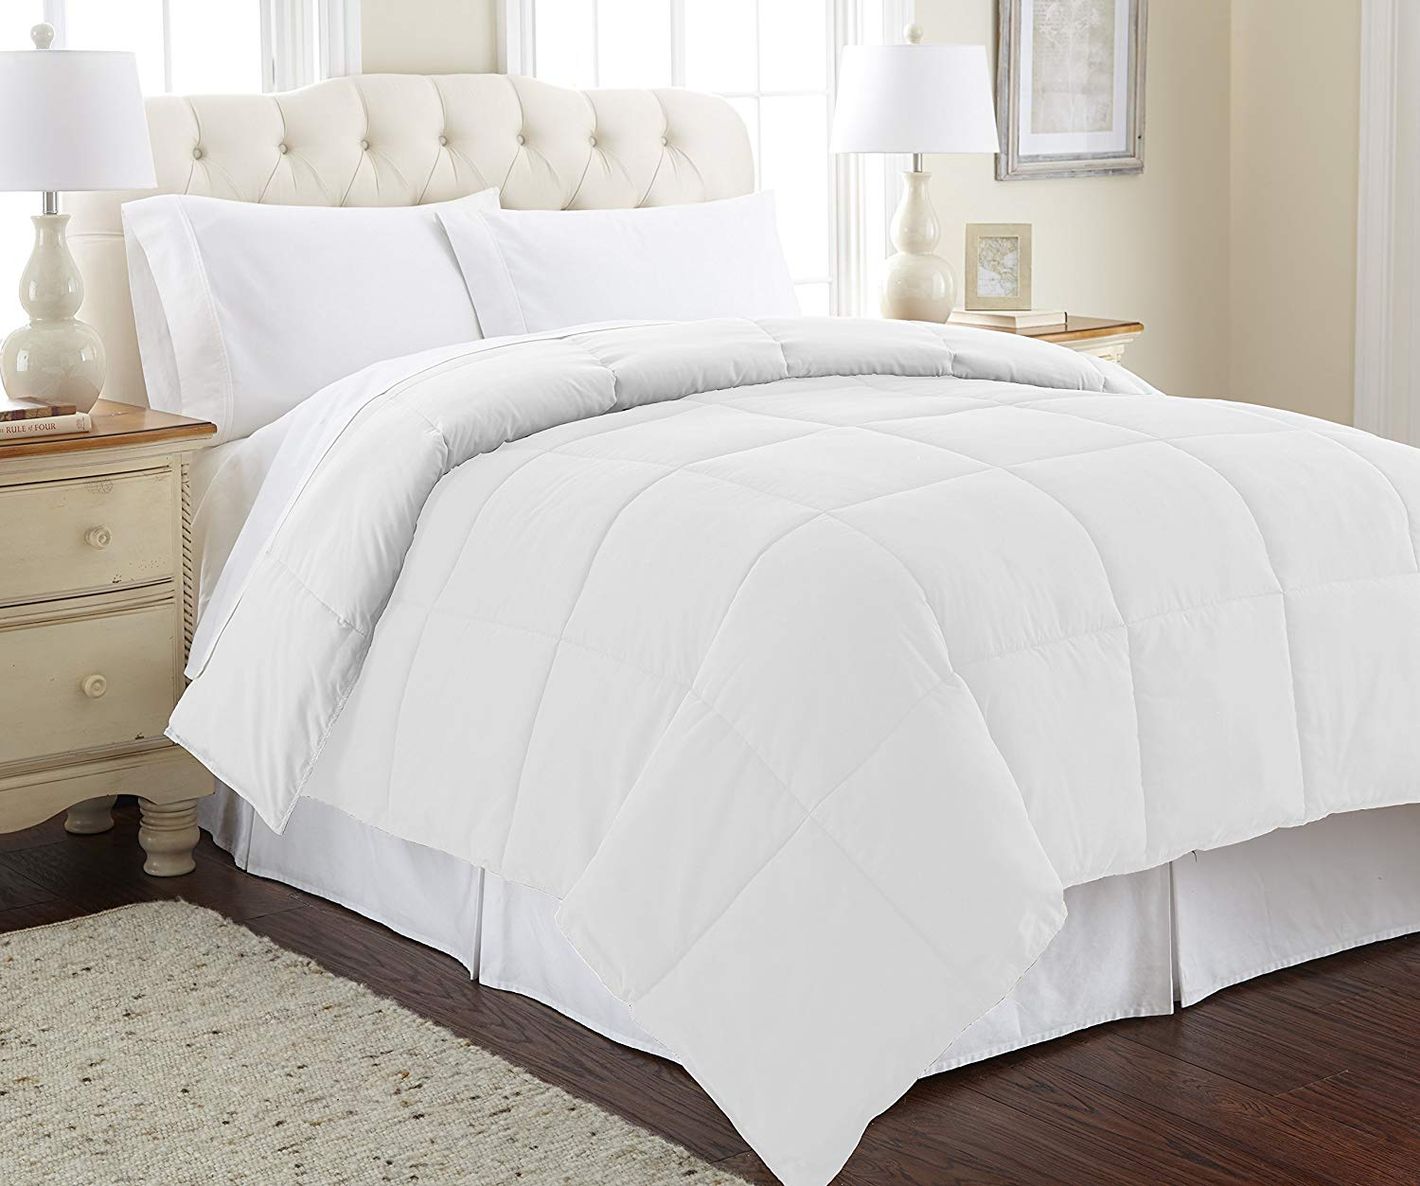 Spirit Linen Home Premium Comforter Cozy and Comfy Over Filled All Season Down Alternative Quilted Blanket Extra Length Stand Alone Puffy Comforter Full/Queen, Anemone Pantone